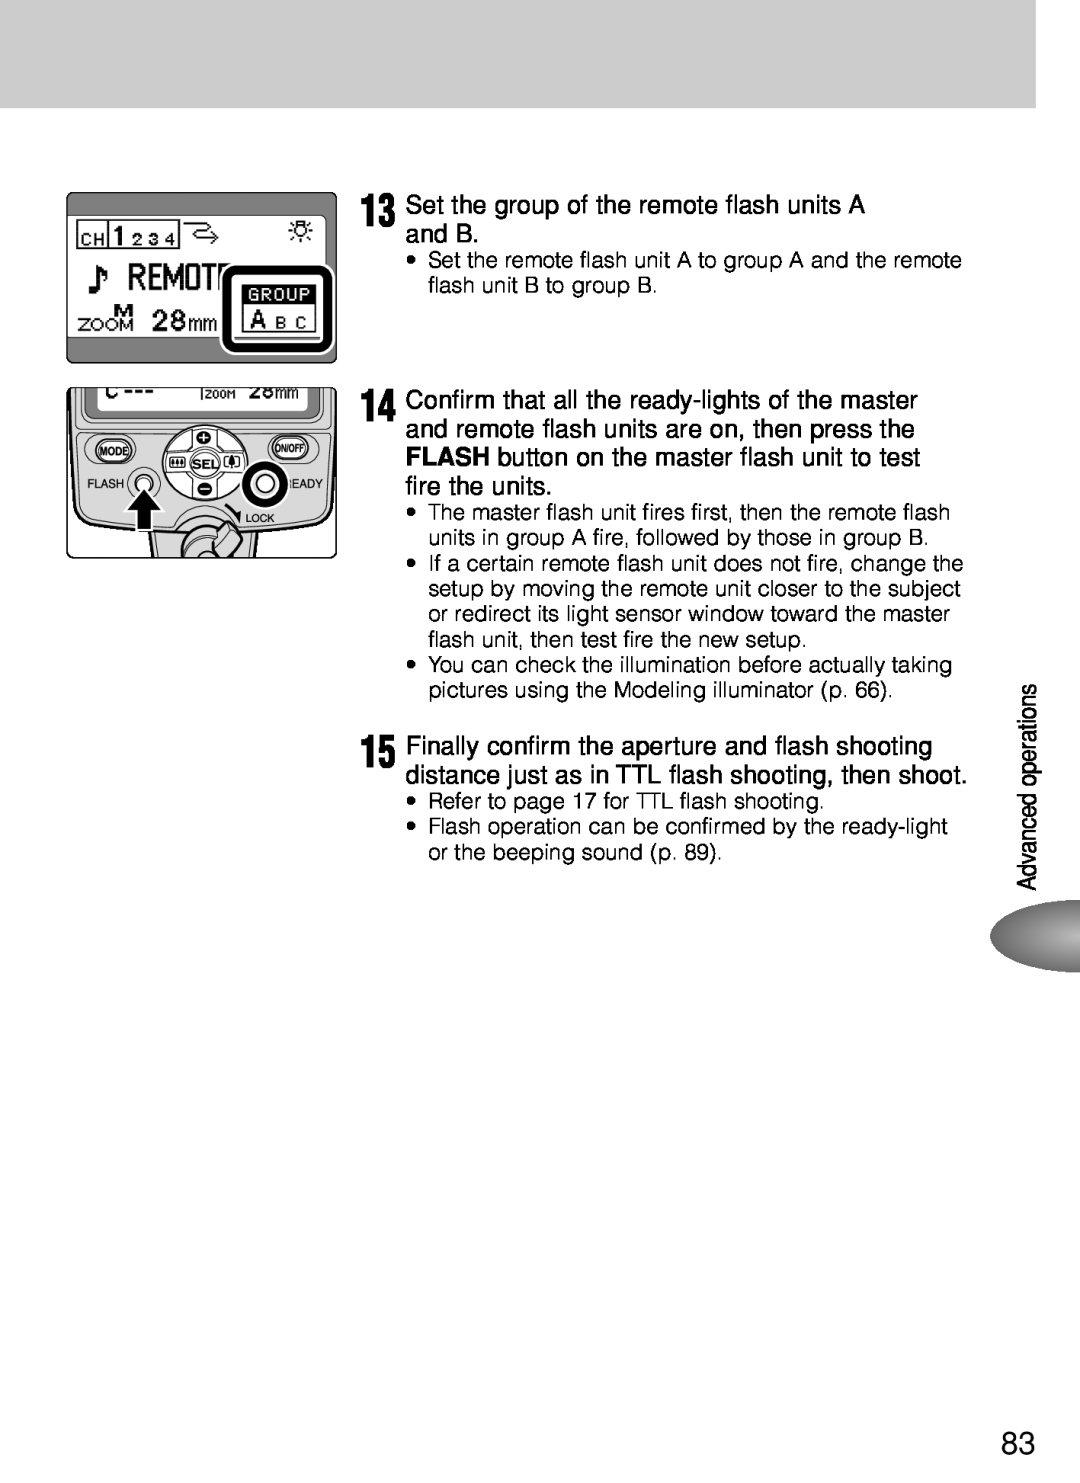 Nikon SB-800 instruction manual Set the group of the remote flash units A and B, Advanced operations 